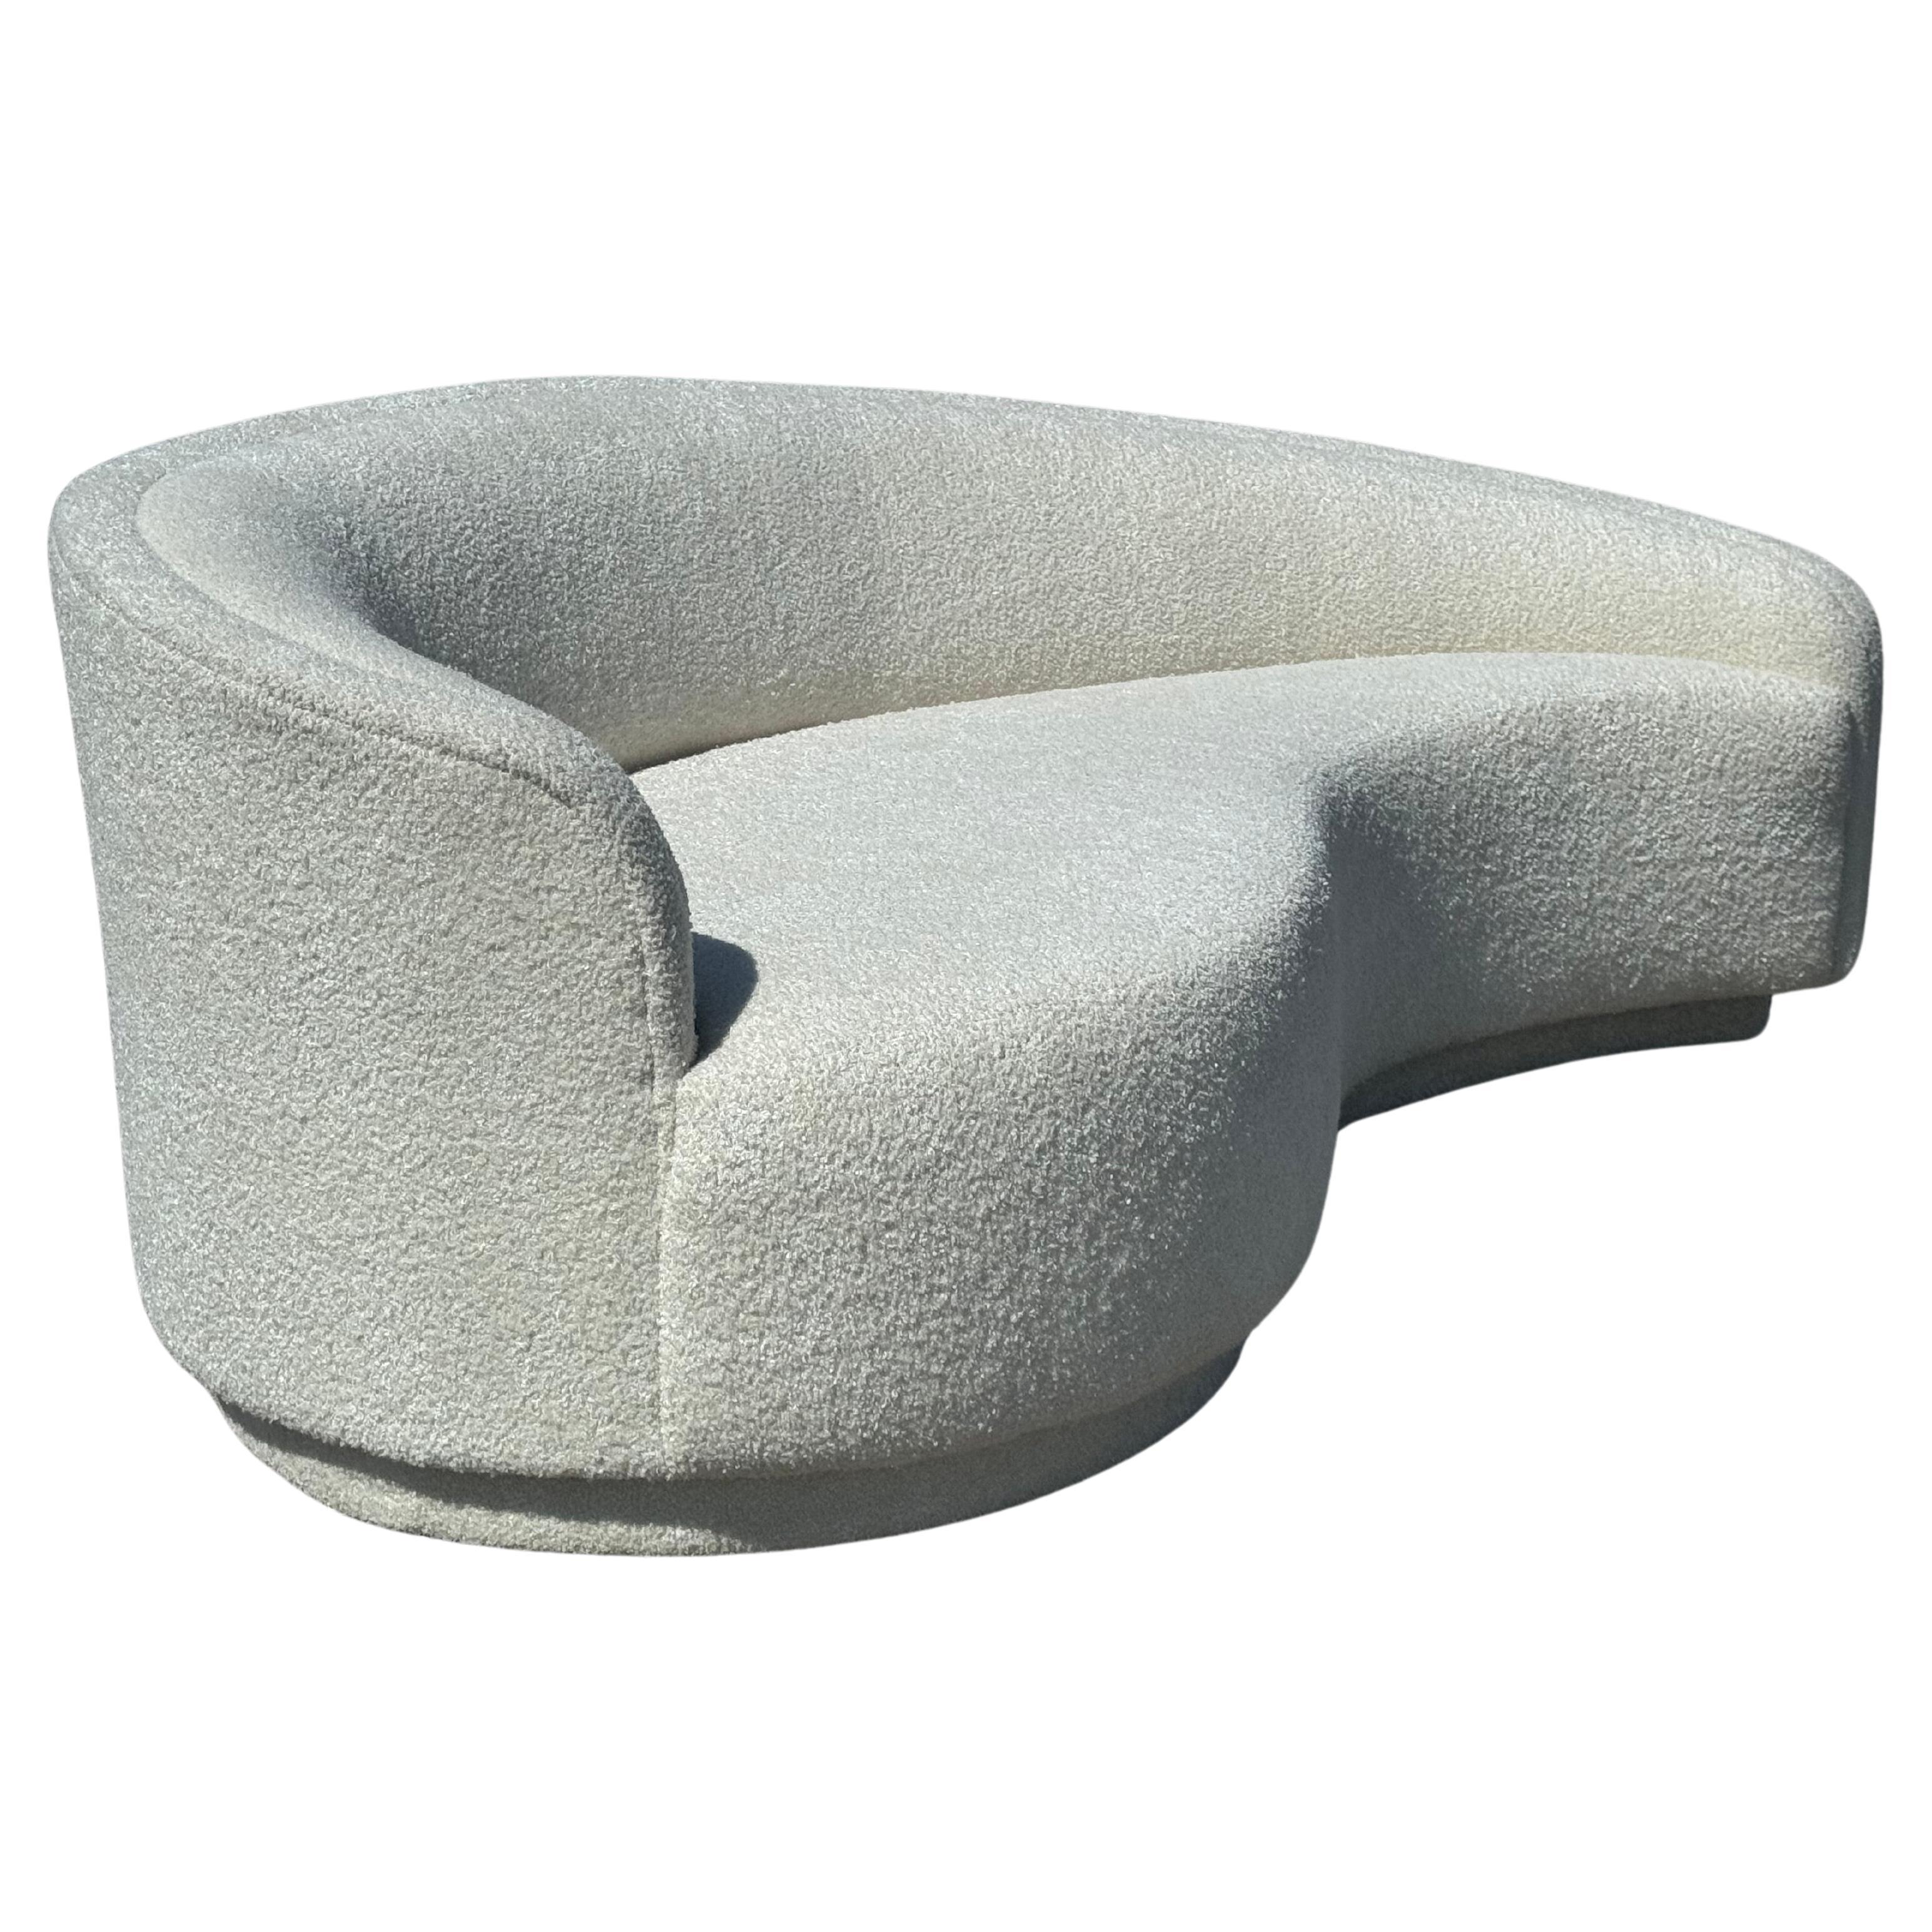 1980s Glamours Curved Sofa - Chaise by Vladimir Kagan for Weiman in White Bouclé For Sale 6